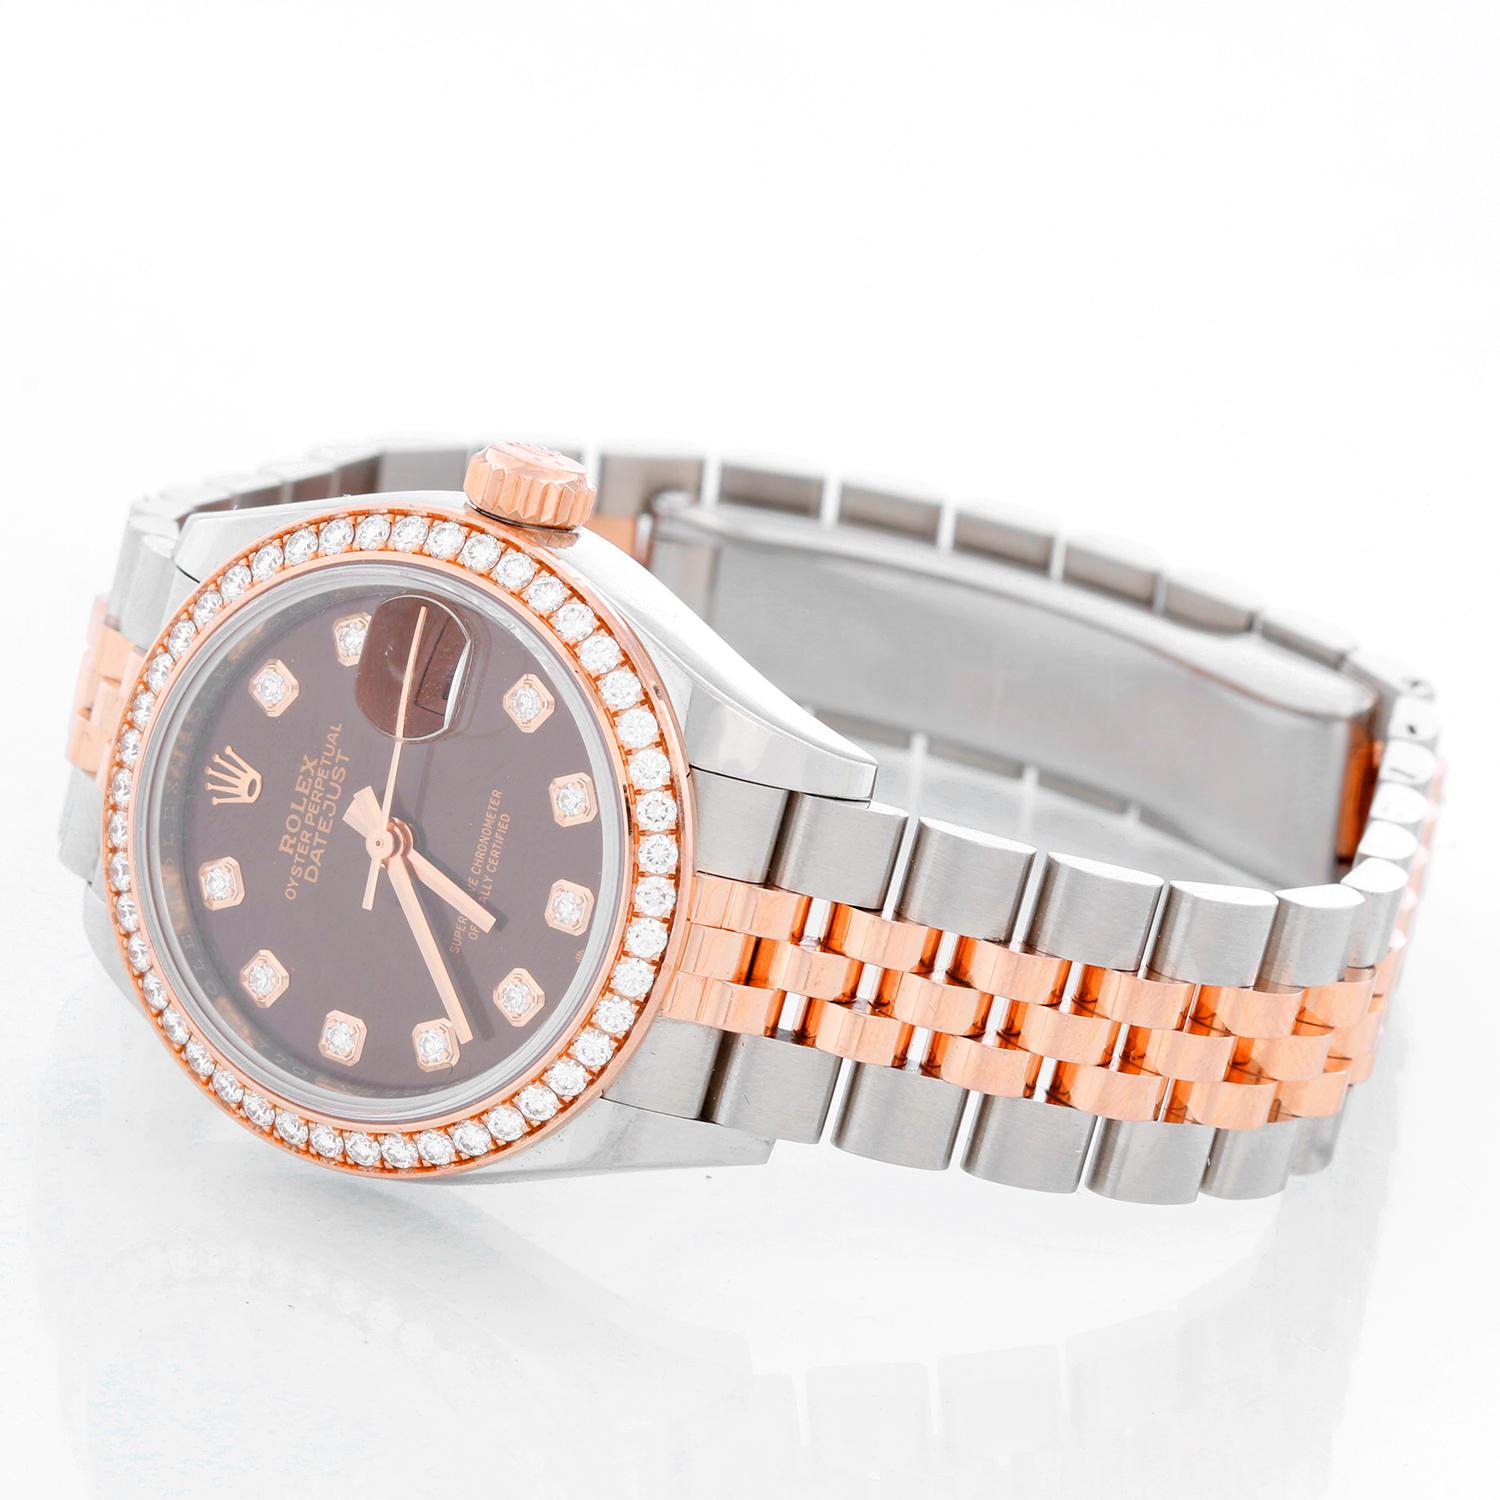 Rolex Datejust 28 Steel Rolesor Everose Gold Diamond Ladies Watch 279381 - Automatic . Stainless steel case with 18K Rose gold Rolex factory diamond bezel (28 mm) . Chocolate brown dial with original Rolex factory diamond hour markers in star